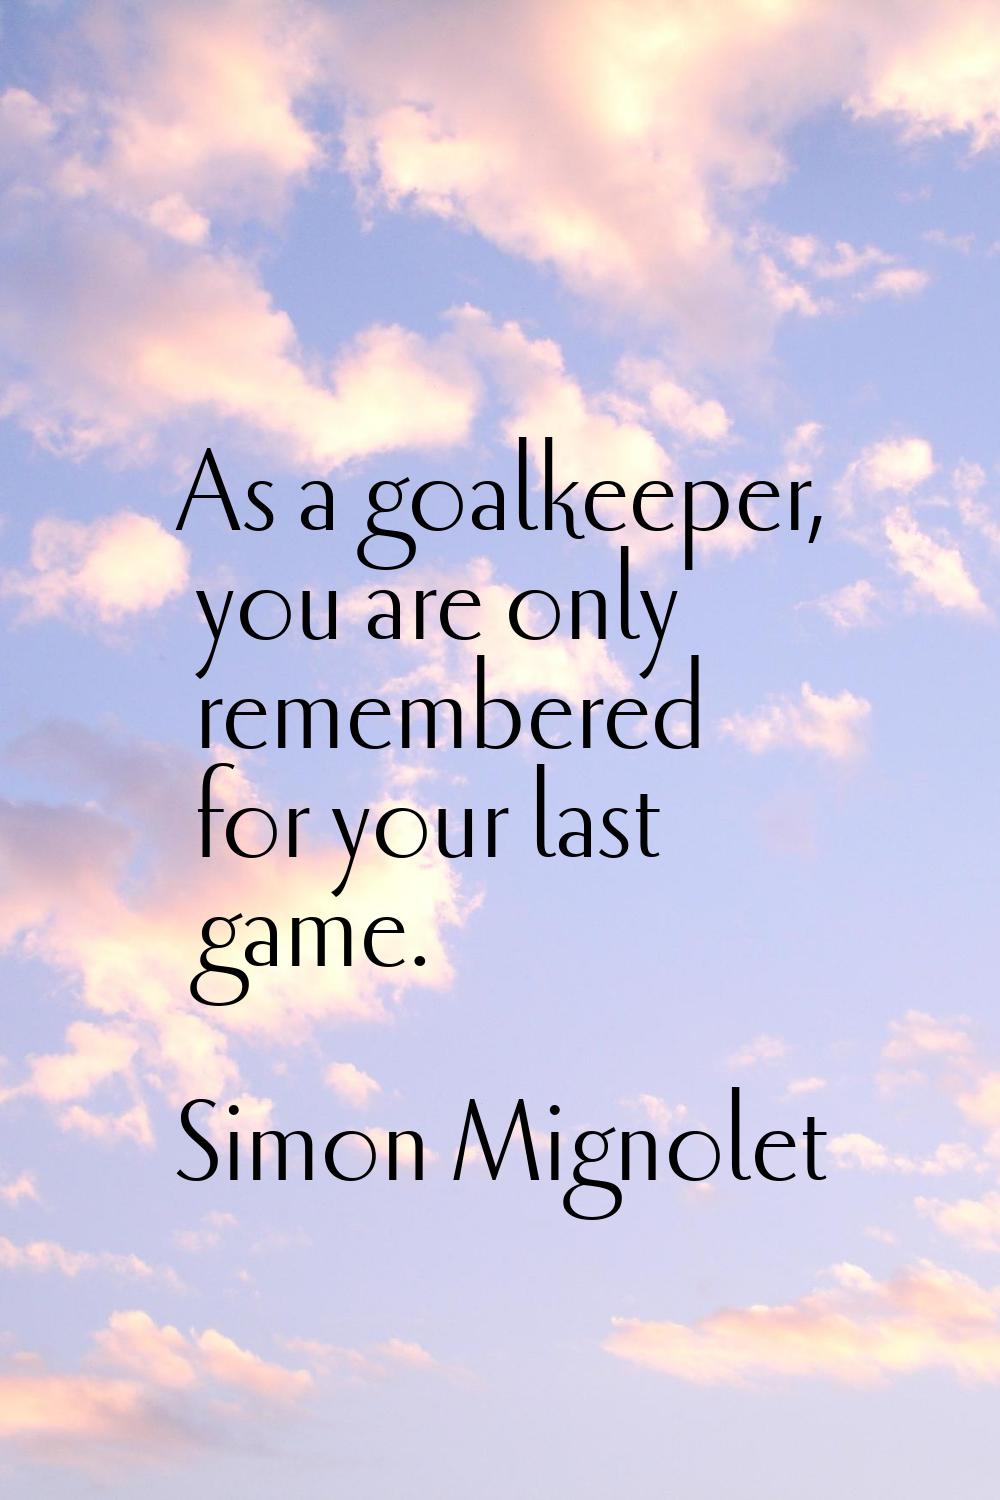 As a goalkeeper, you are only remembered for your last game.